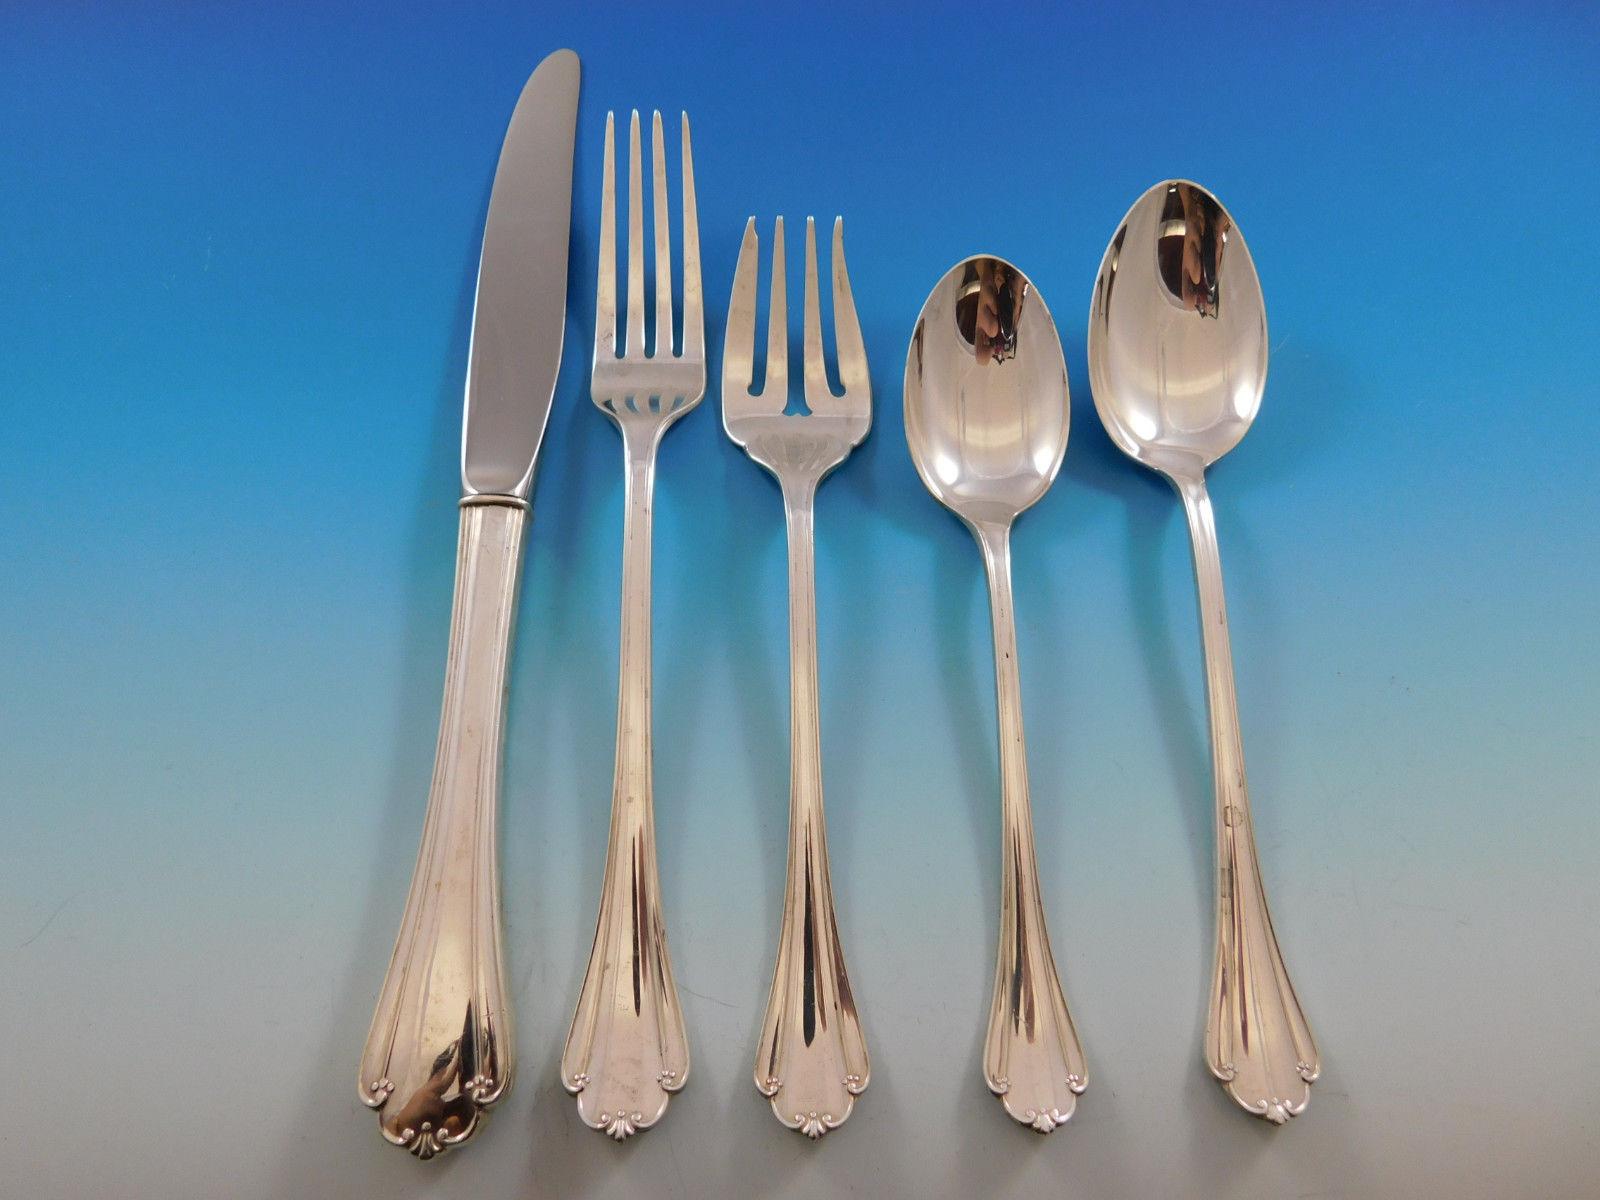 Gorgeous Delicacy by Lunt sterling silver Flatware set, 42 pieces. This set includes:

Eight knives, 9